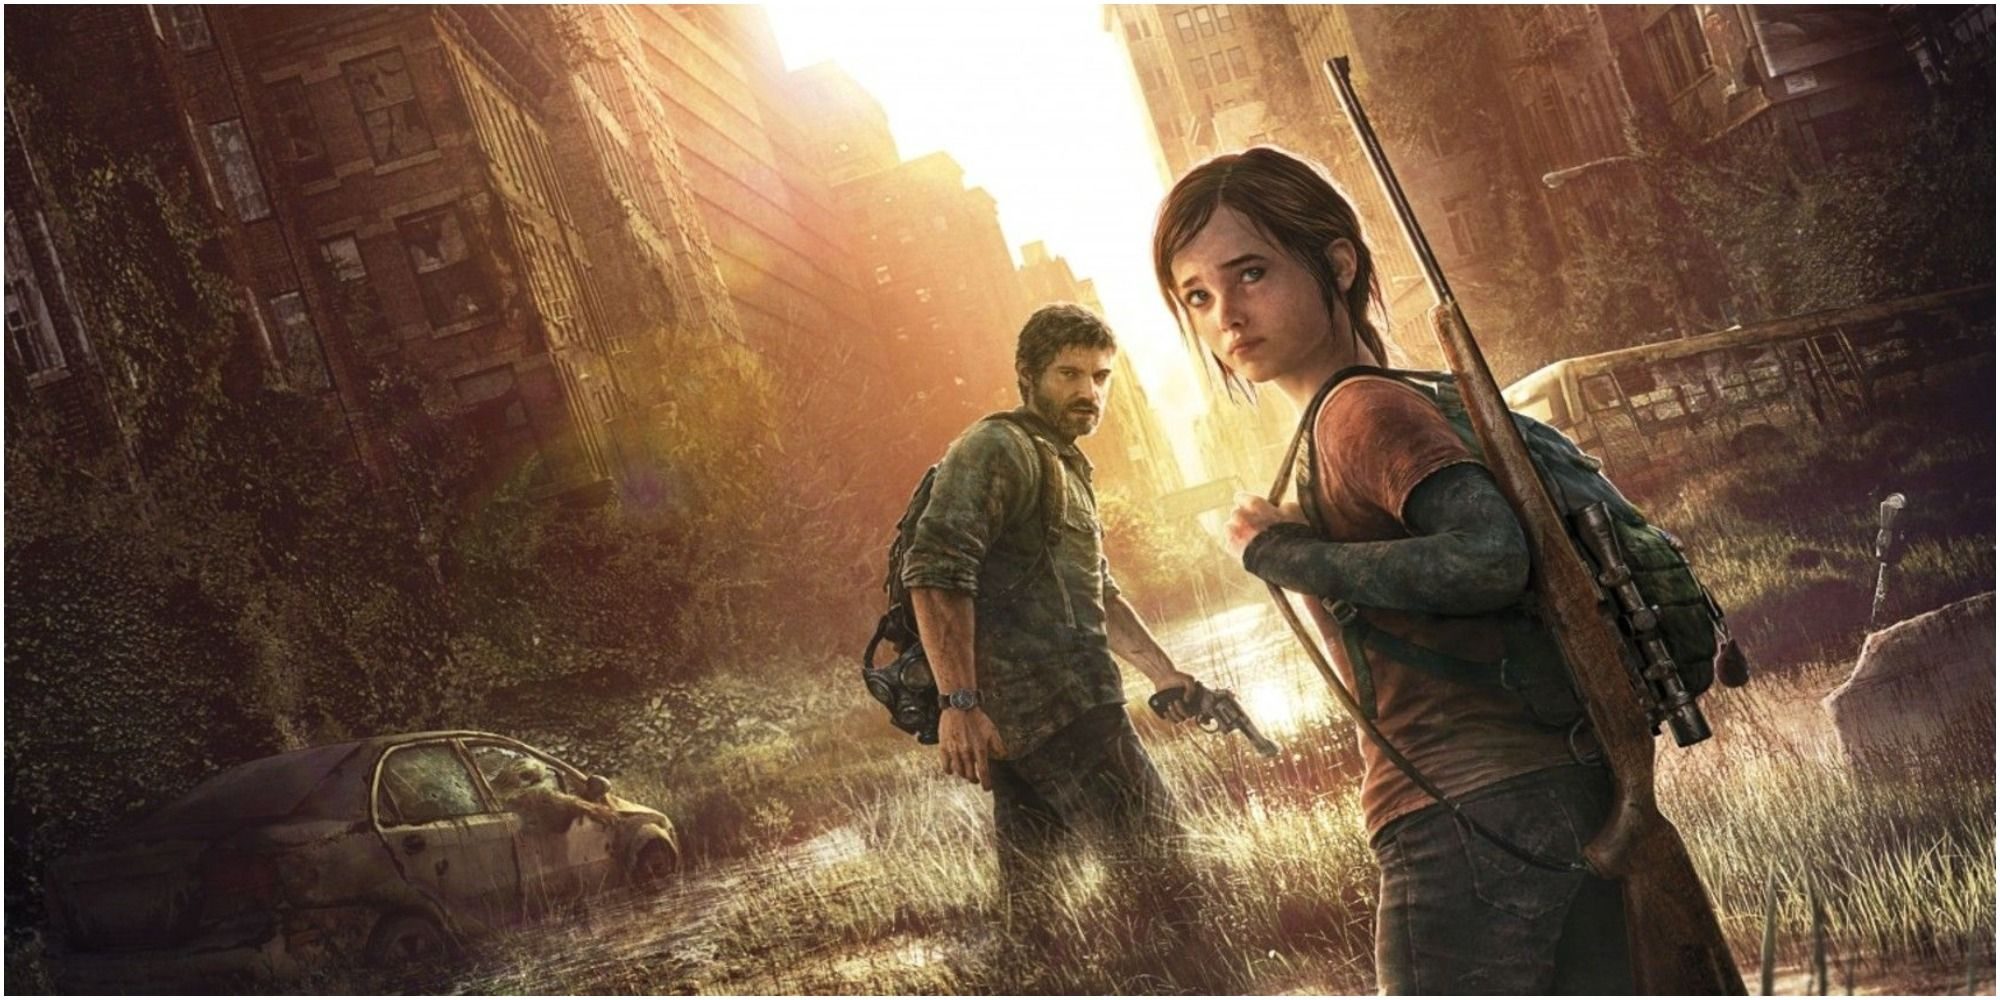 the-last-of-us-promotional-artwork-with-ellie-and-joel-3024545